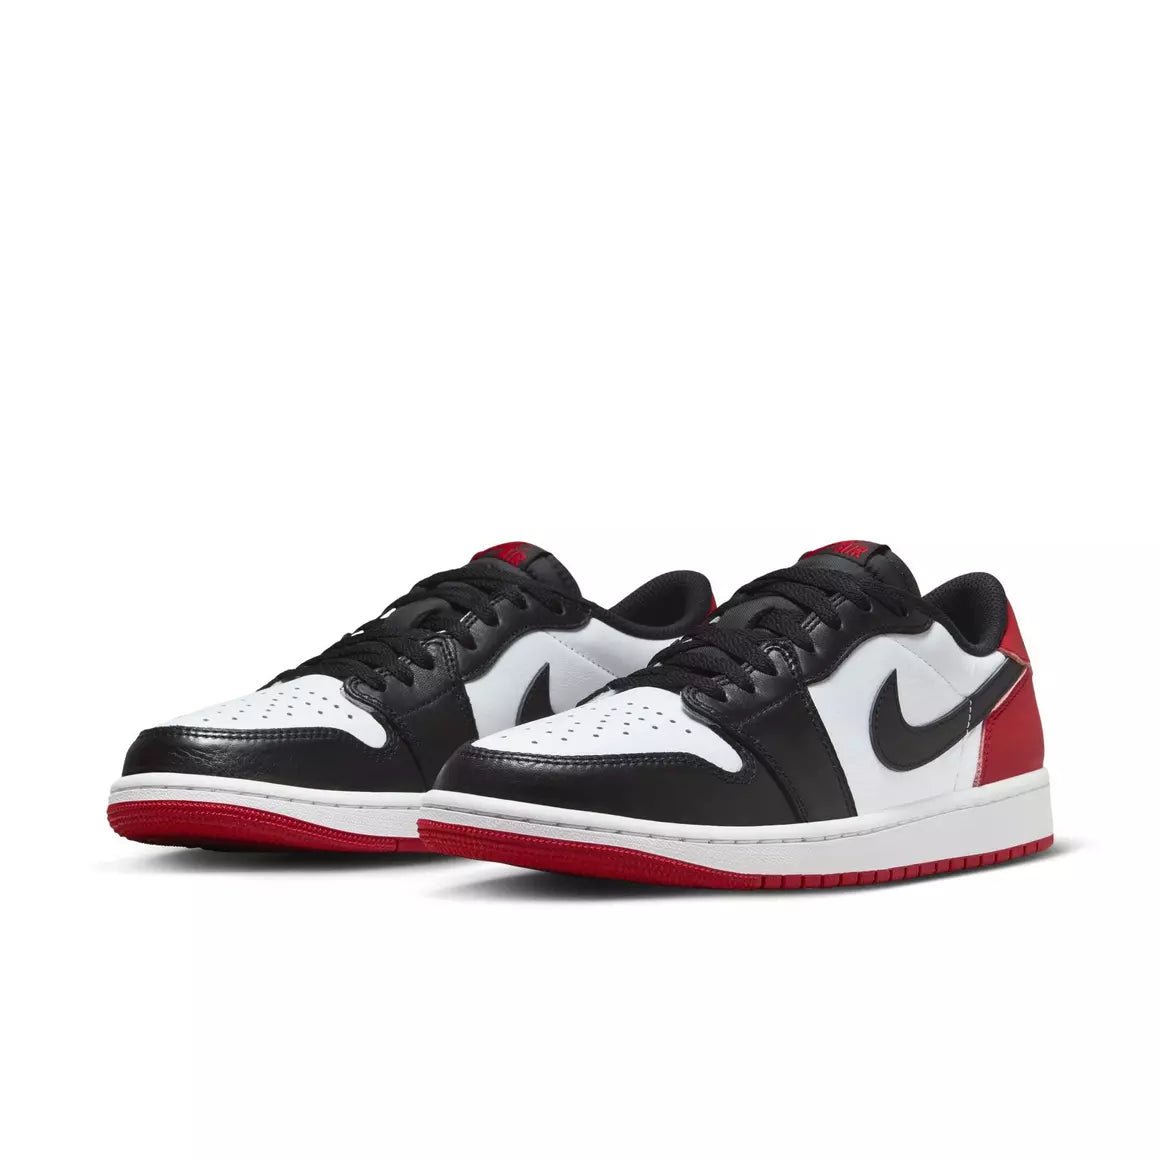 Lace Swaps for Your Air Jordan 1 Low Black Toes – Shoe Lace Supply